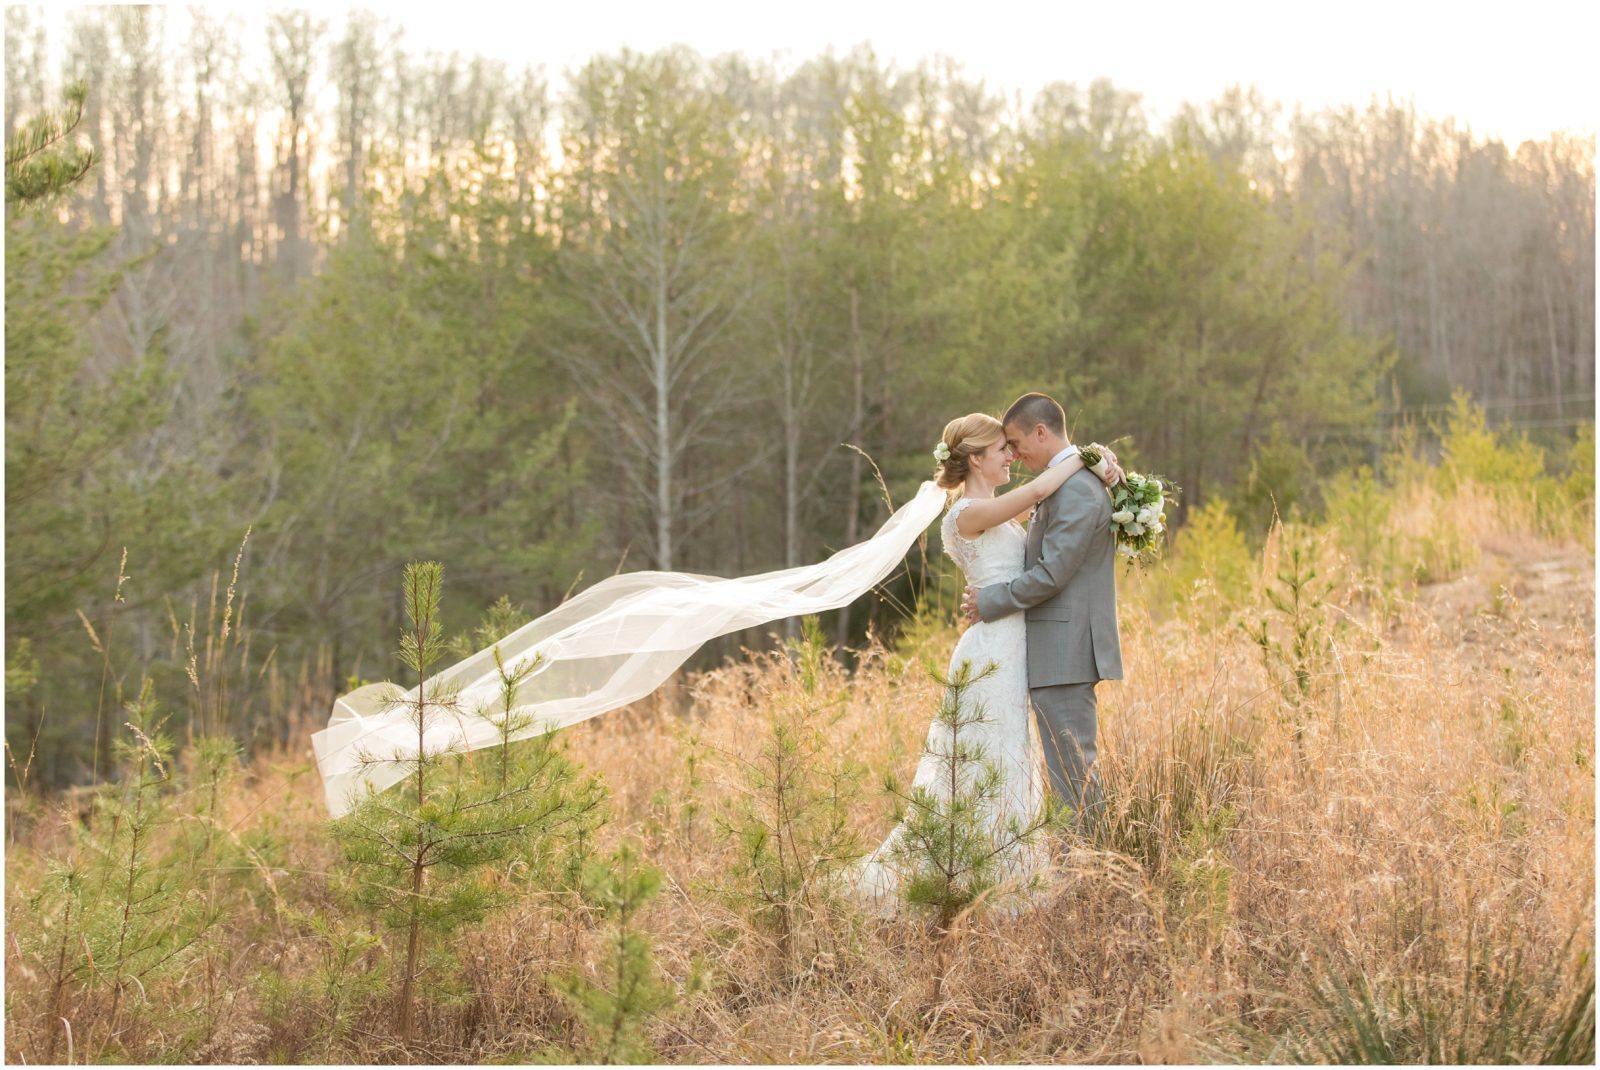 Bride and Groom at sunset in tall grass with the mountains behind them at the Cliffview Resort in Campton, KY